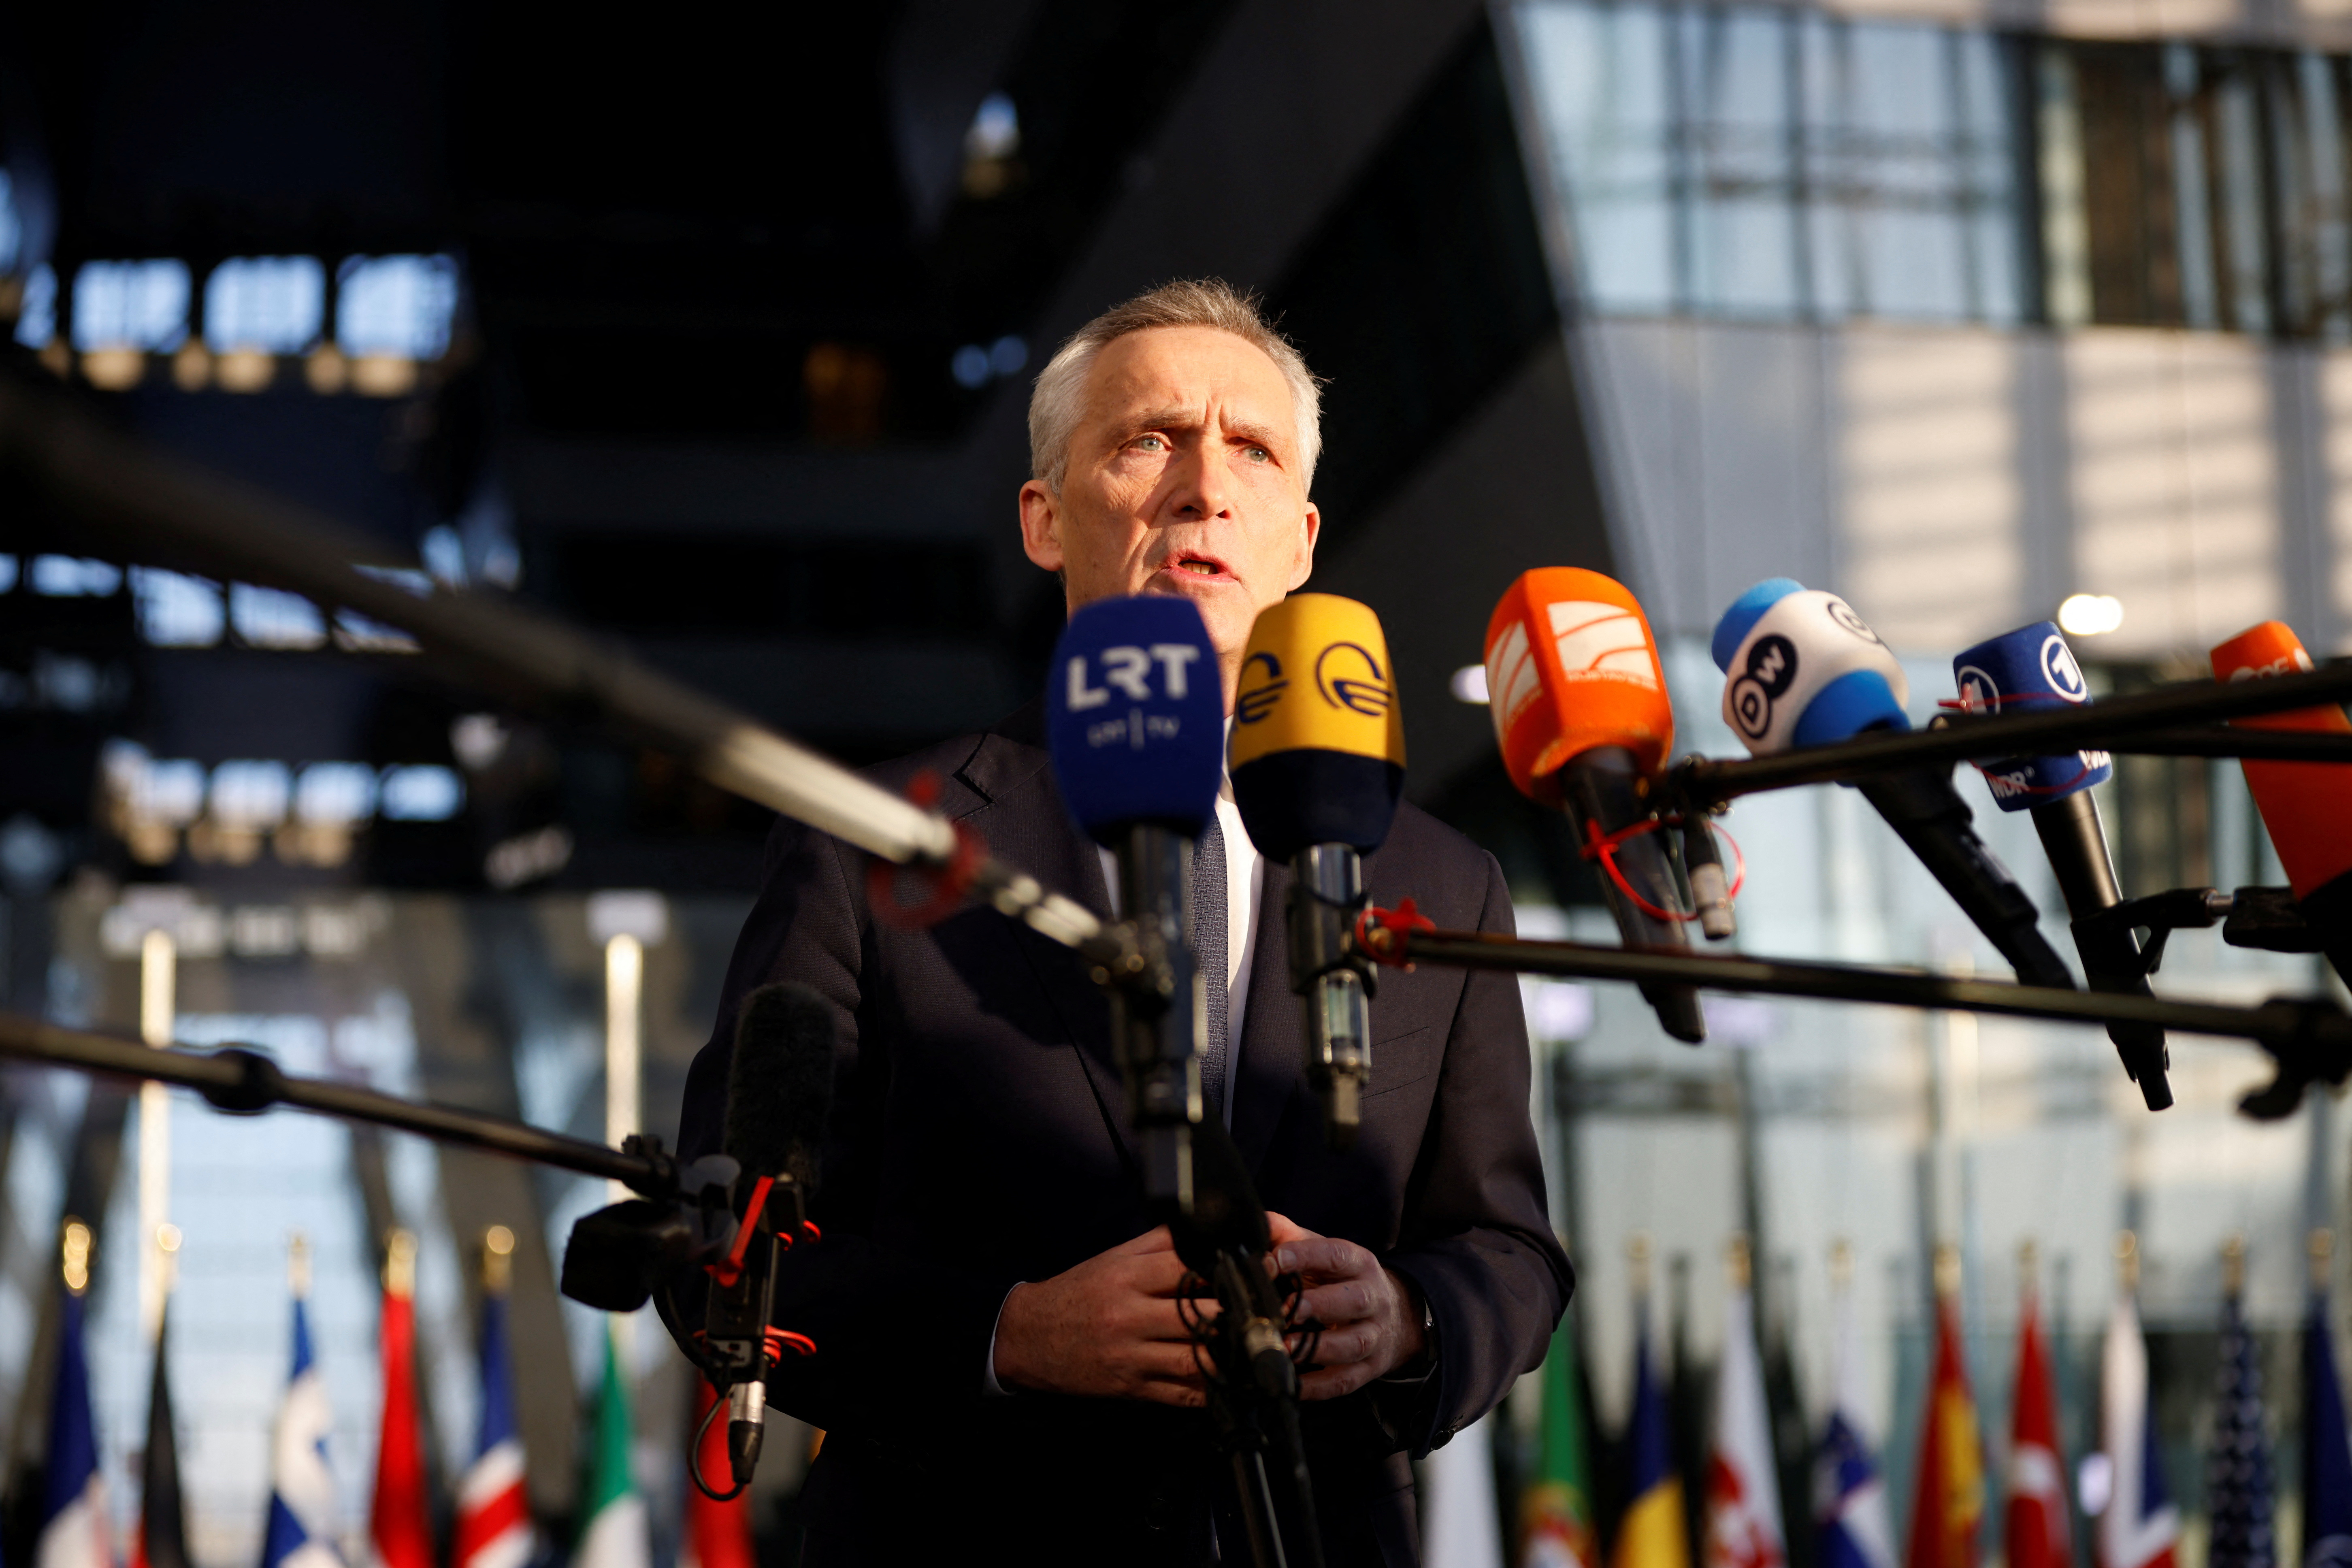 NATO defence ministers meeting in Brussels